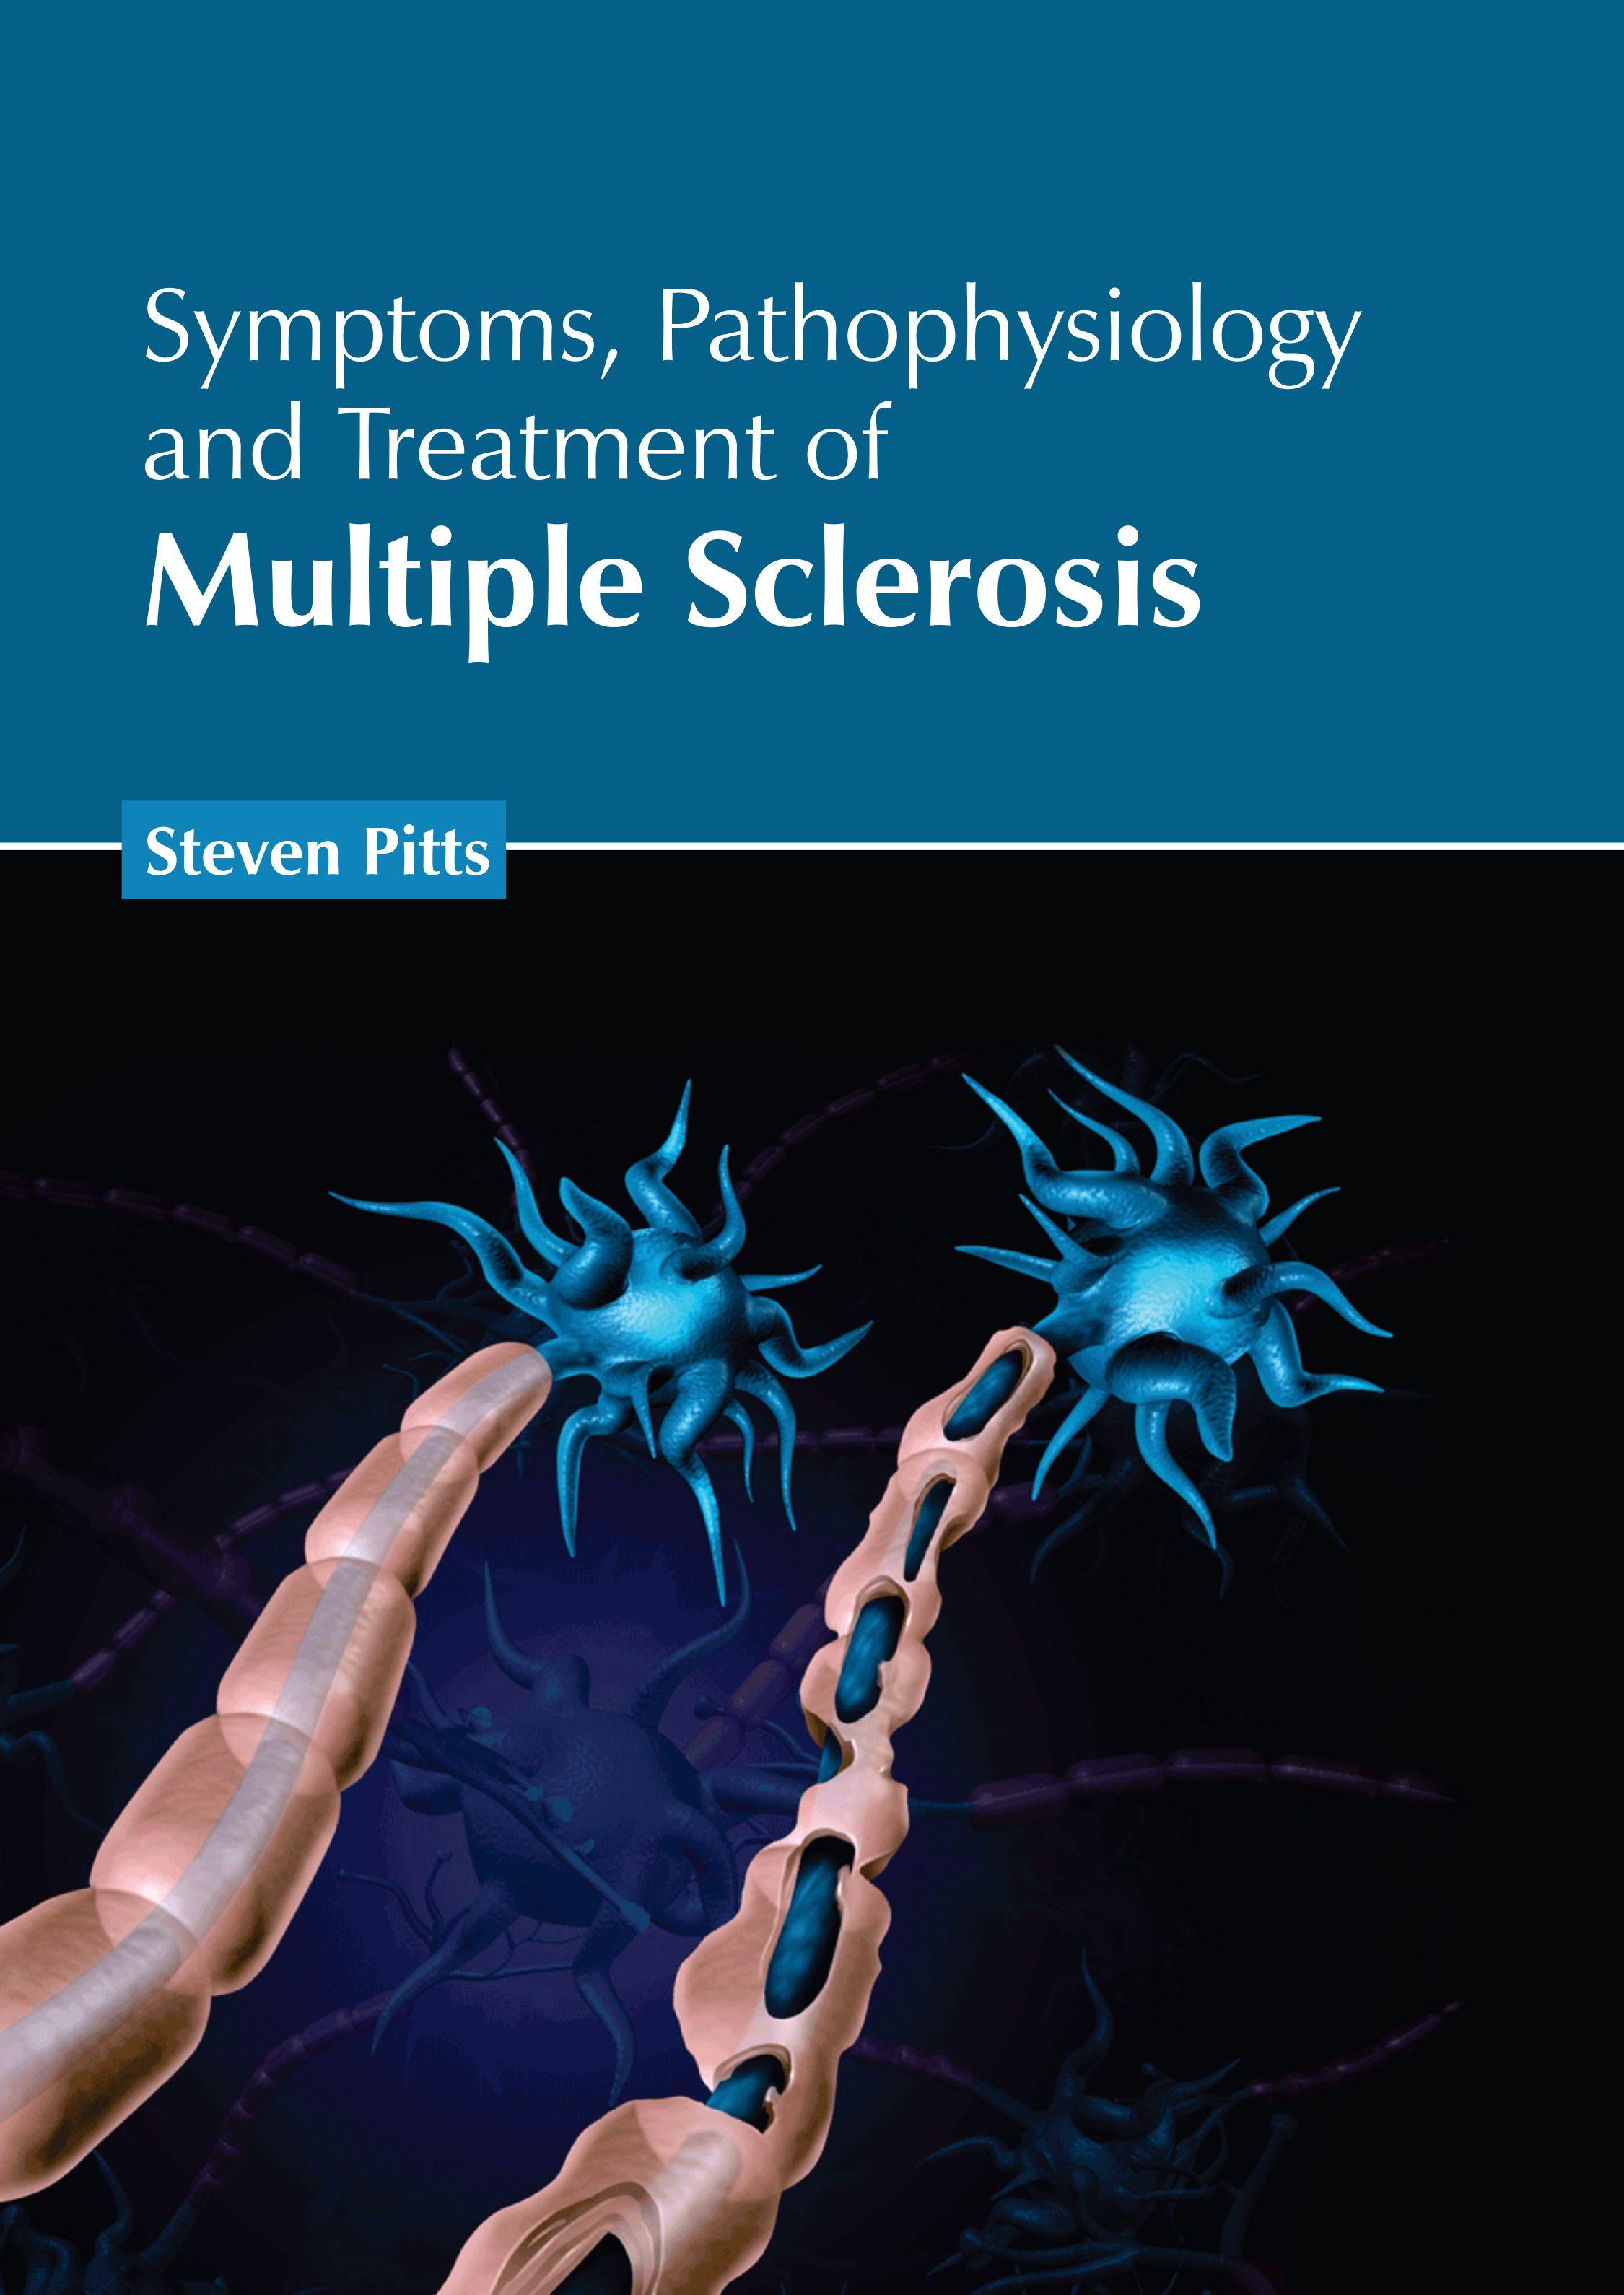 SYMPTOMS, PATHOPHYSIOLOGY AND TREATMENT OF MULTIPLE SCLEROSIS